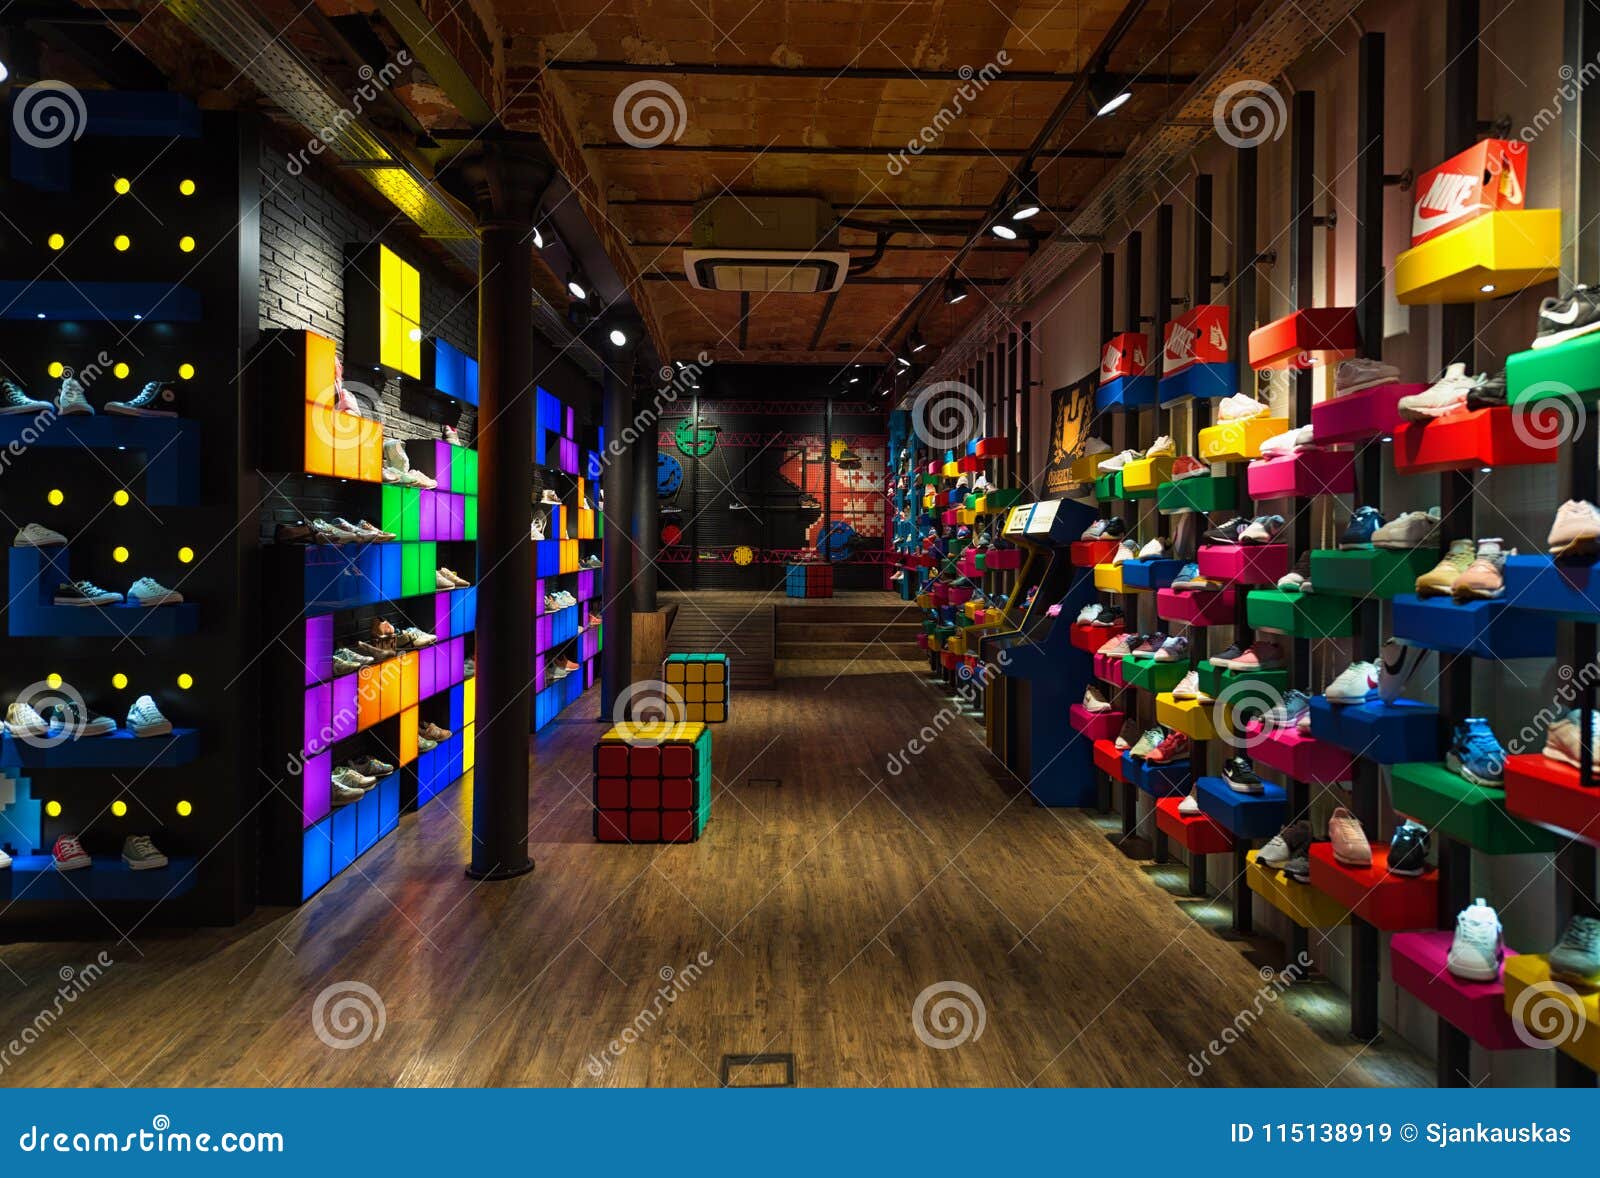 Game store front hi-res stock photography and images - Alamy